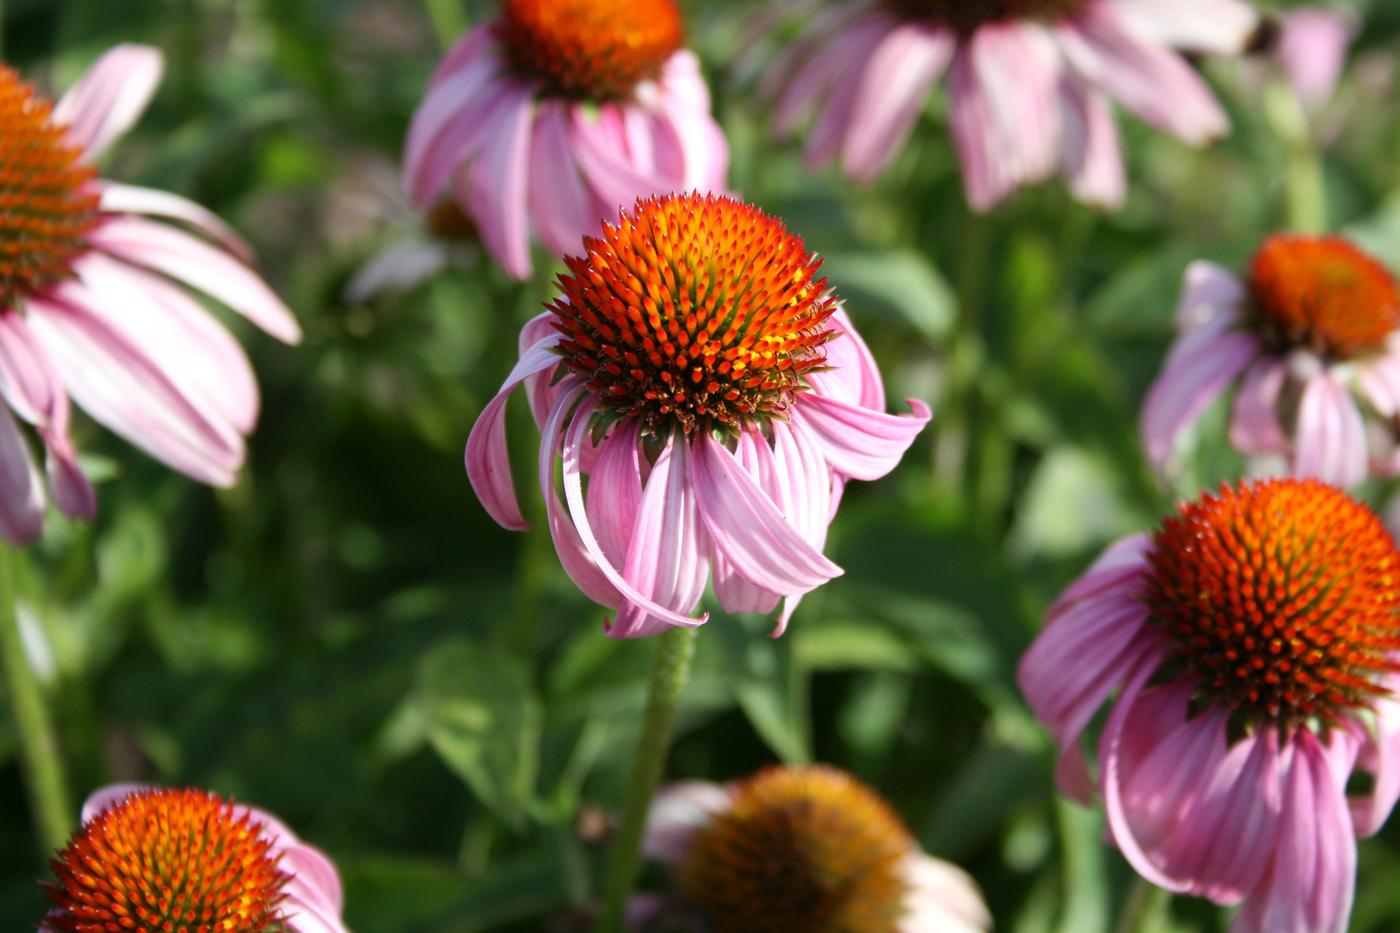 Purple coneflowers are native plants that look great in the prairie as well as in formal designs. Coneflowers such as this Bright Star are perfect plants for the garden.